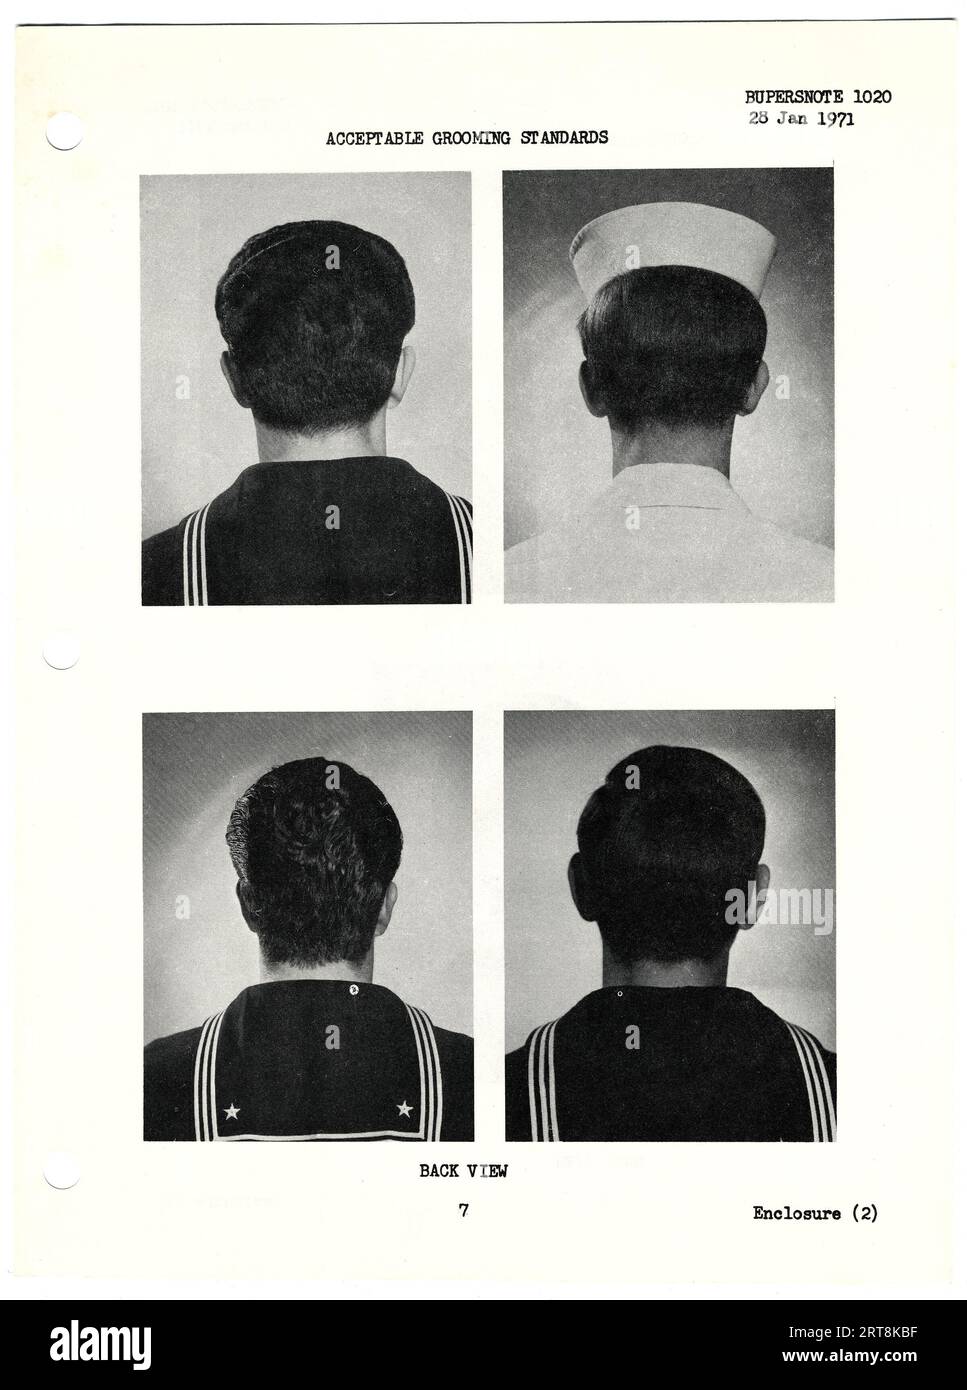 U.S. Navy Bureau of Personnel Notice showing 'Acceptable Grooming Standards' sent to all Navy bases and ships in 1971. Stock Photo